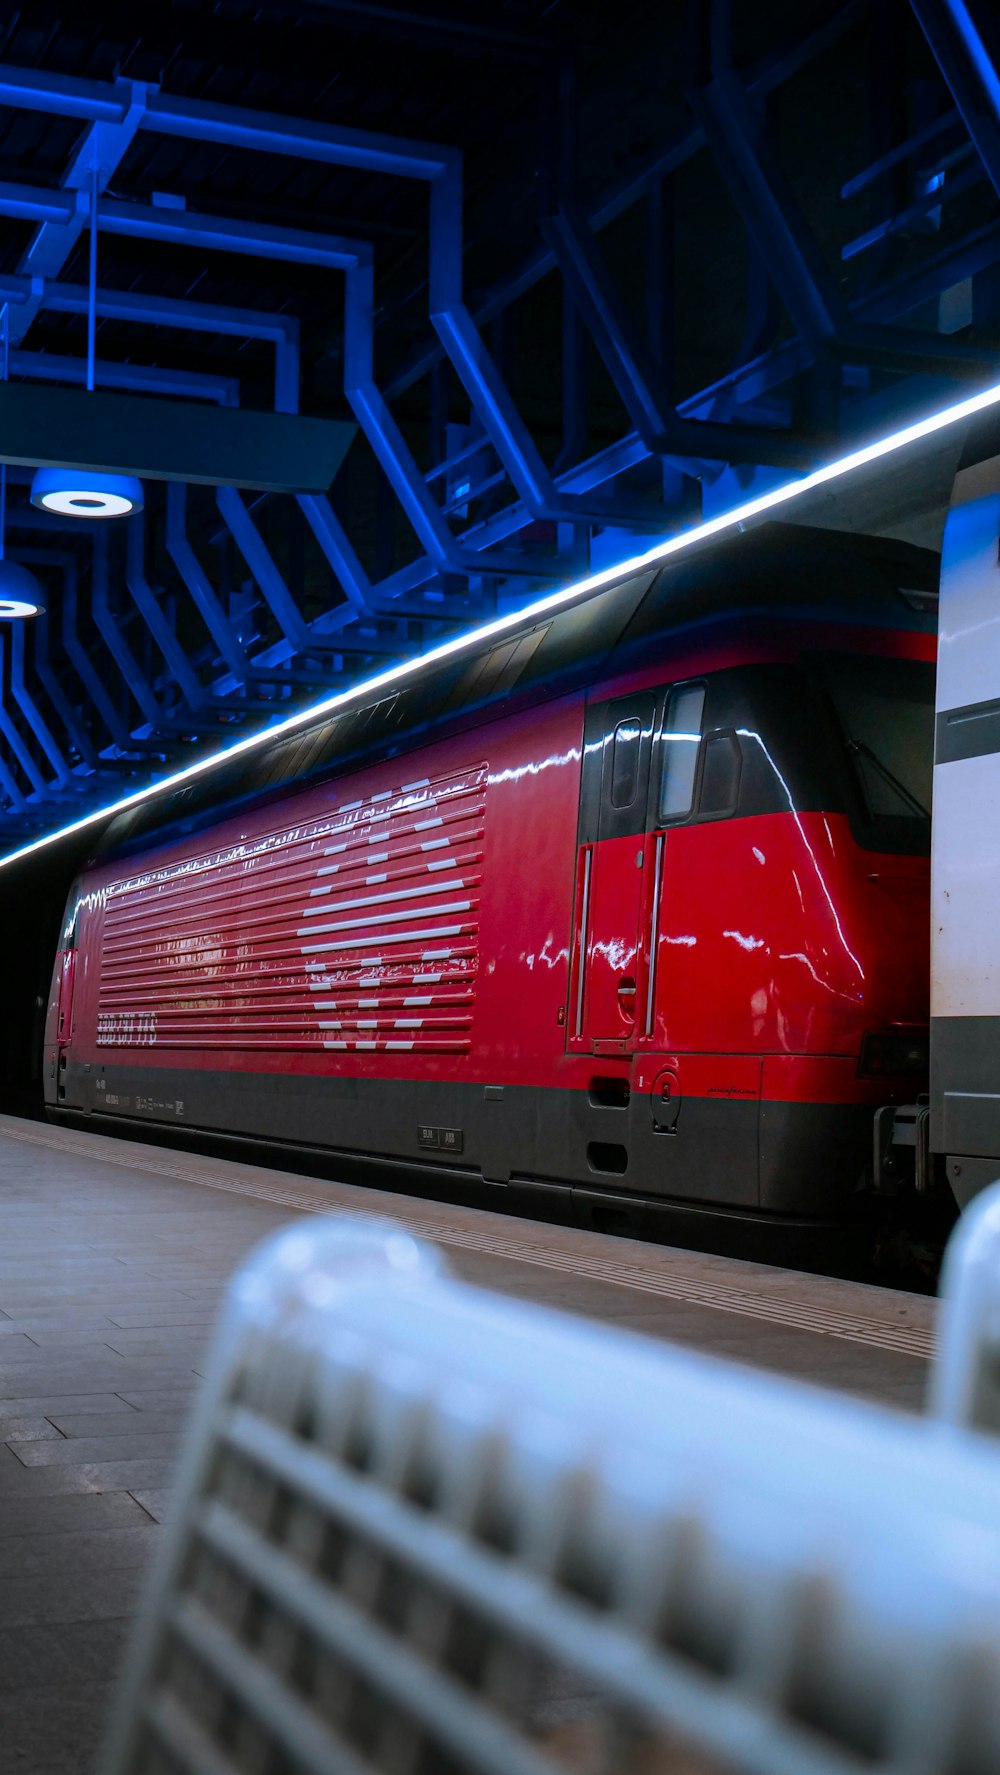 a red train is parked in a train station